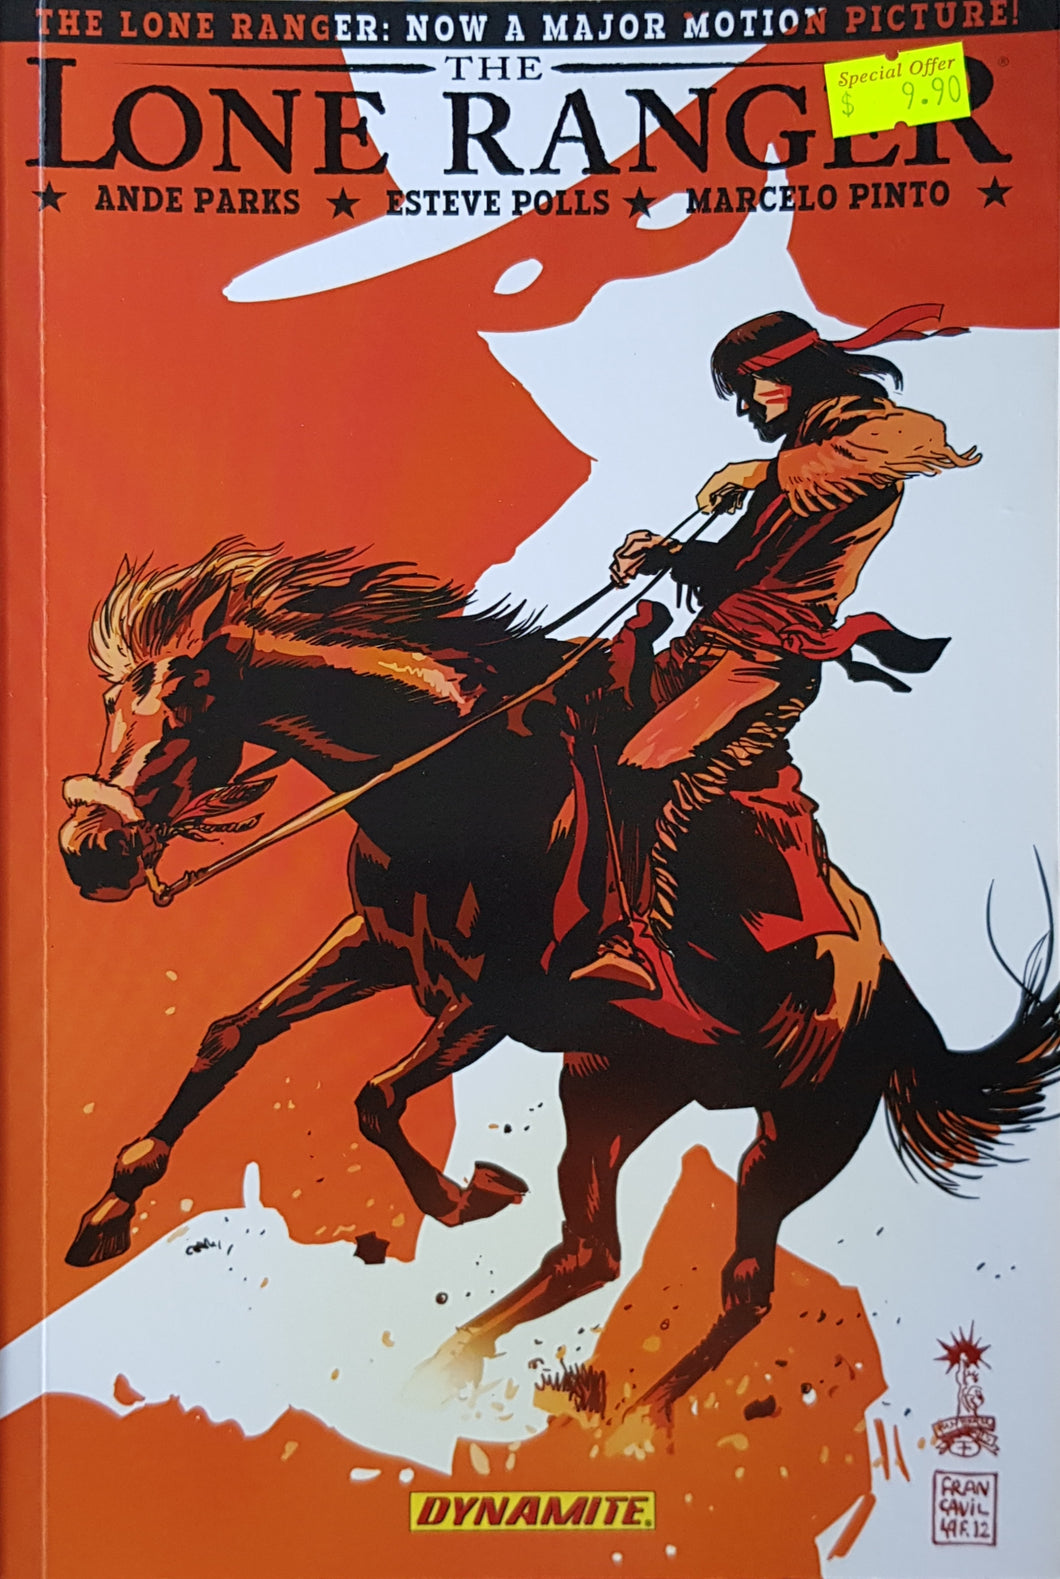 The Lone Ranger Volume 6: Native Ground  -   Ande Parks